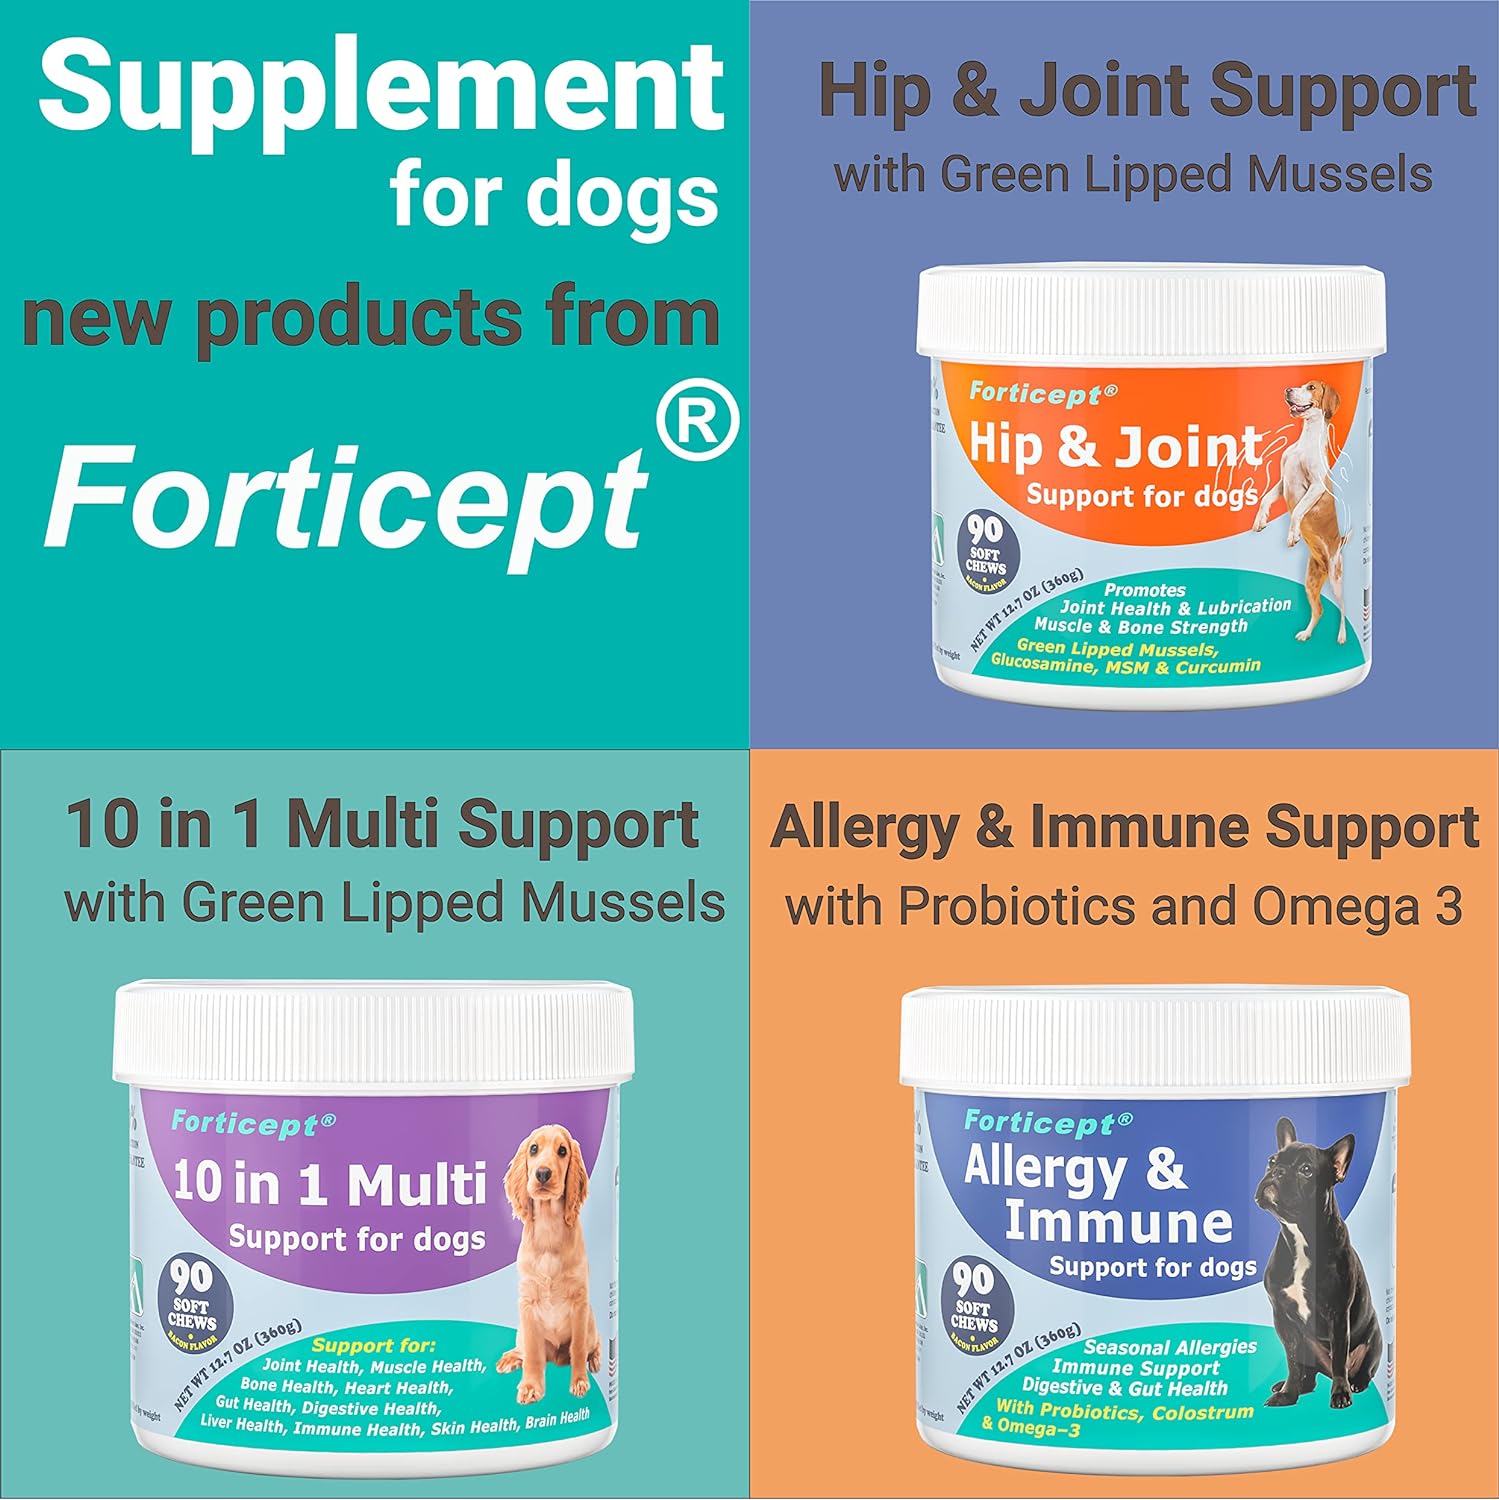 Forticept Hot Spot Treatment and Wound Care Kit for Dogs&Cats |Hotspot Wound Wash Spray 8oz + Wound Care Ointment 4oz + 2" 5 Yards Paw Bandage Wrap | First Aid Kit : Pet Supplies